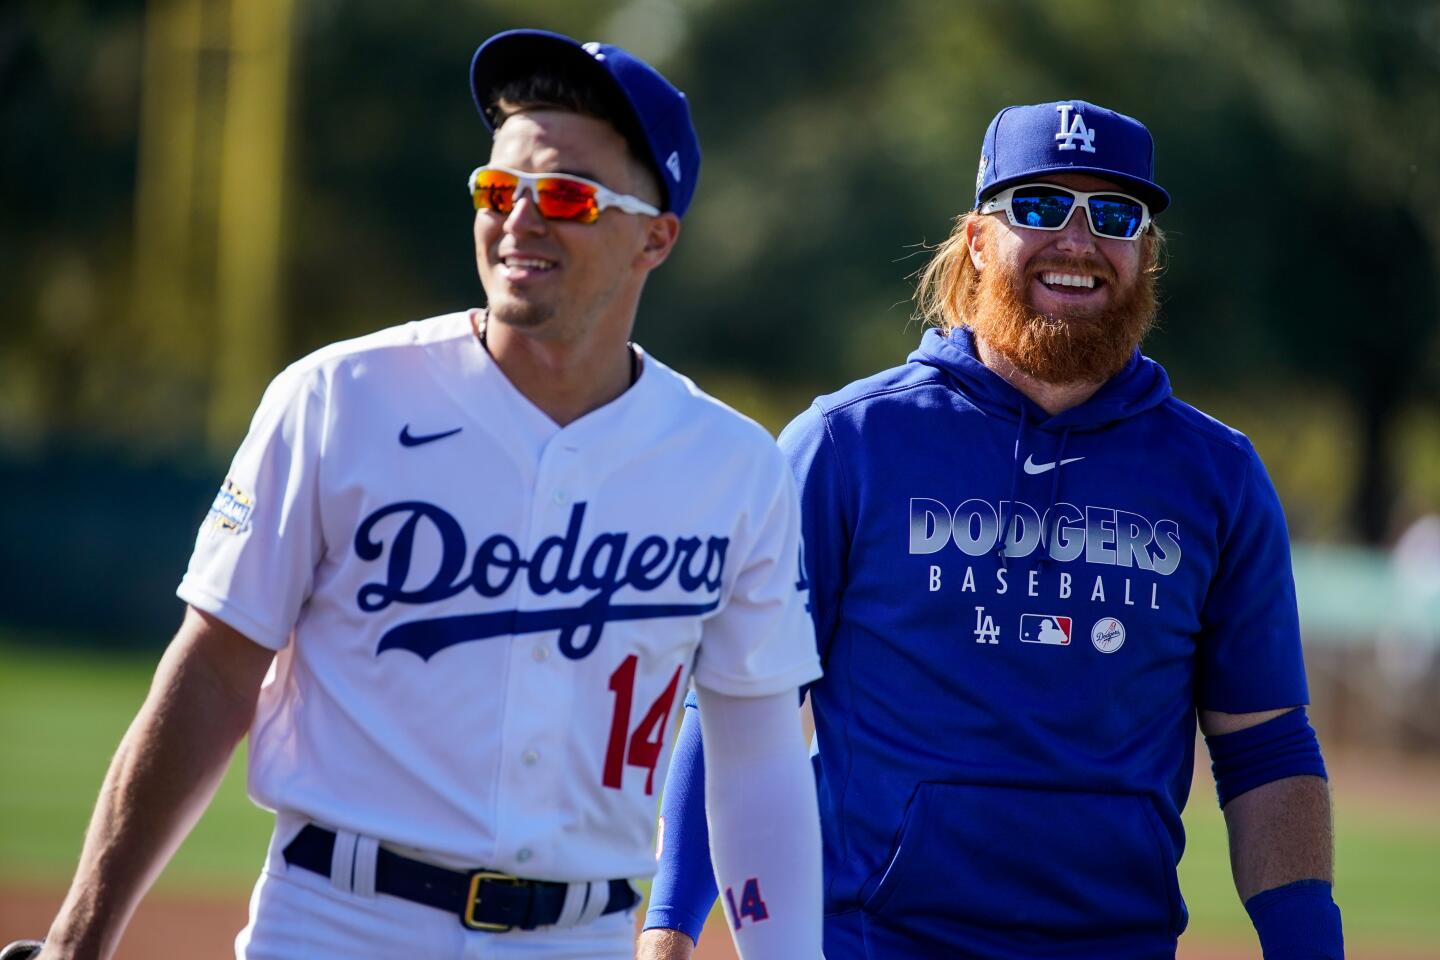 The Dodgers' Kiké Hernández (14) and Justin Turner walk off field after a practice at Camelback Ranch